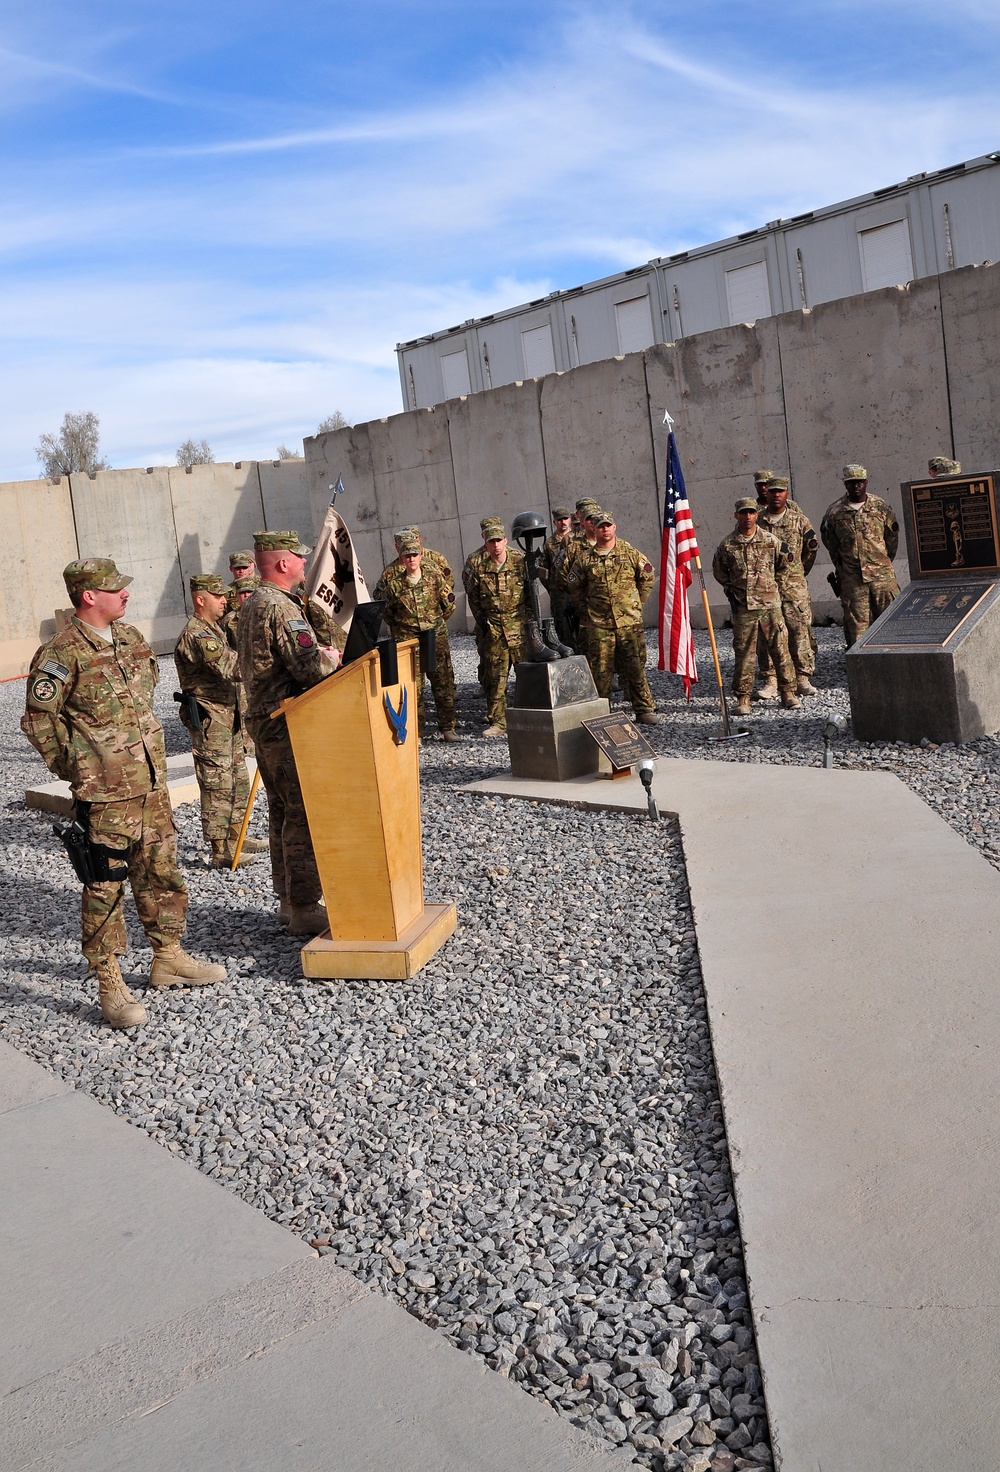 Expeditionary security forces squadron deactivates at Kandahar